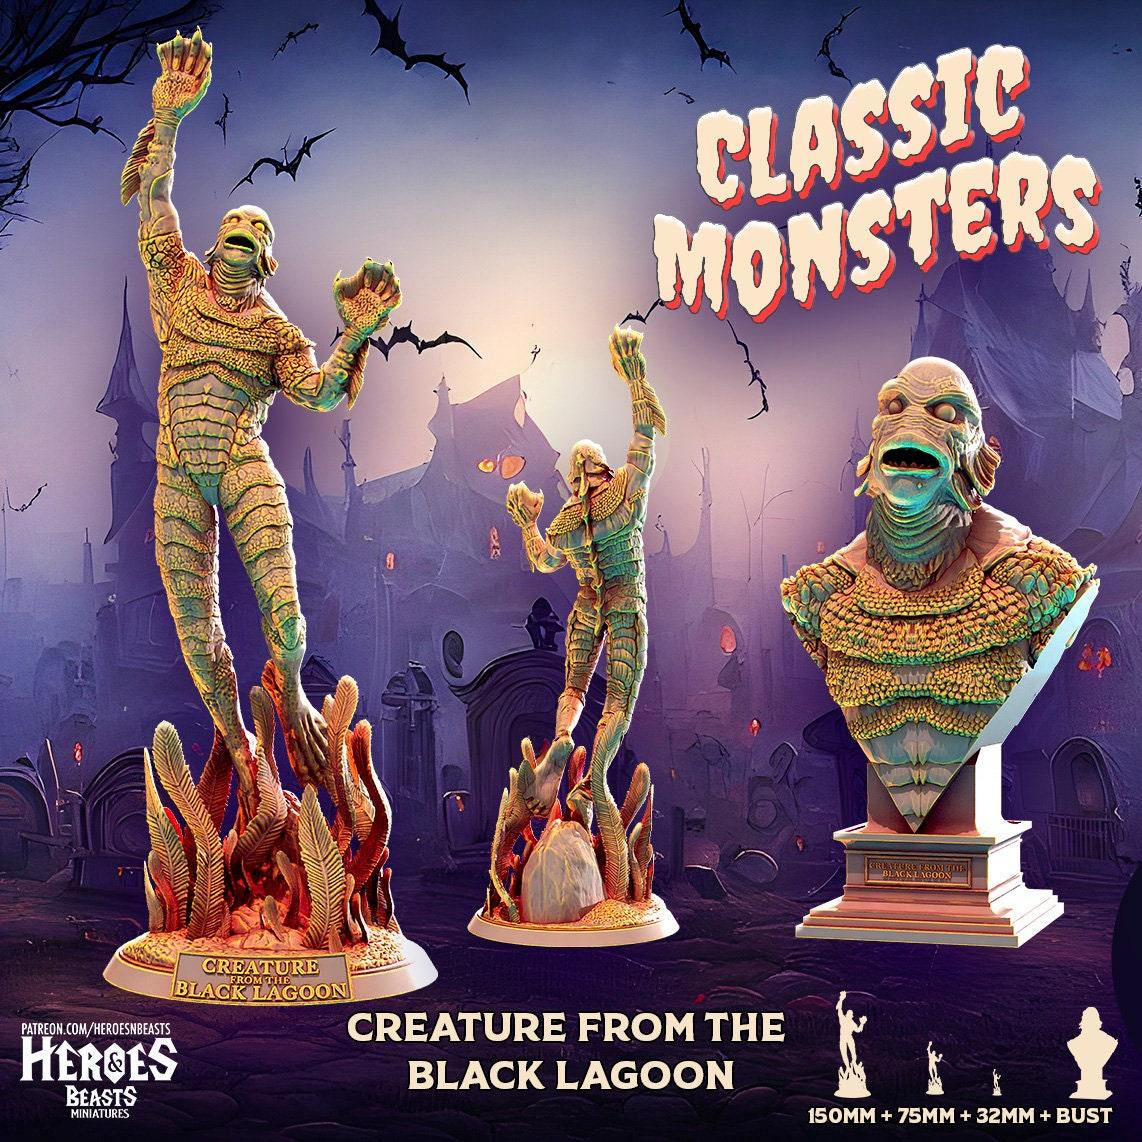 Creature from the Black Lagoon Miniature Resin Bust | Classic Monsters | DnD Miniature | Dungeons and Dragons, DnD 5e Feature Film Theatre - Plague Miniatures shop for DnD Miniatures